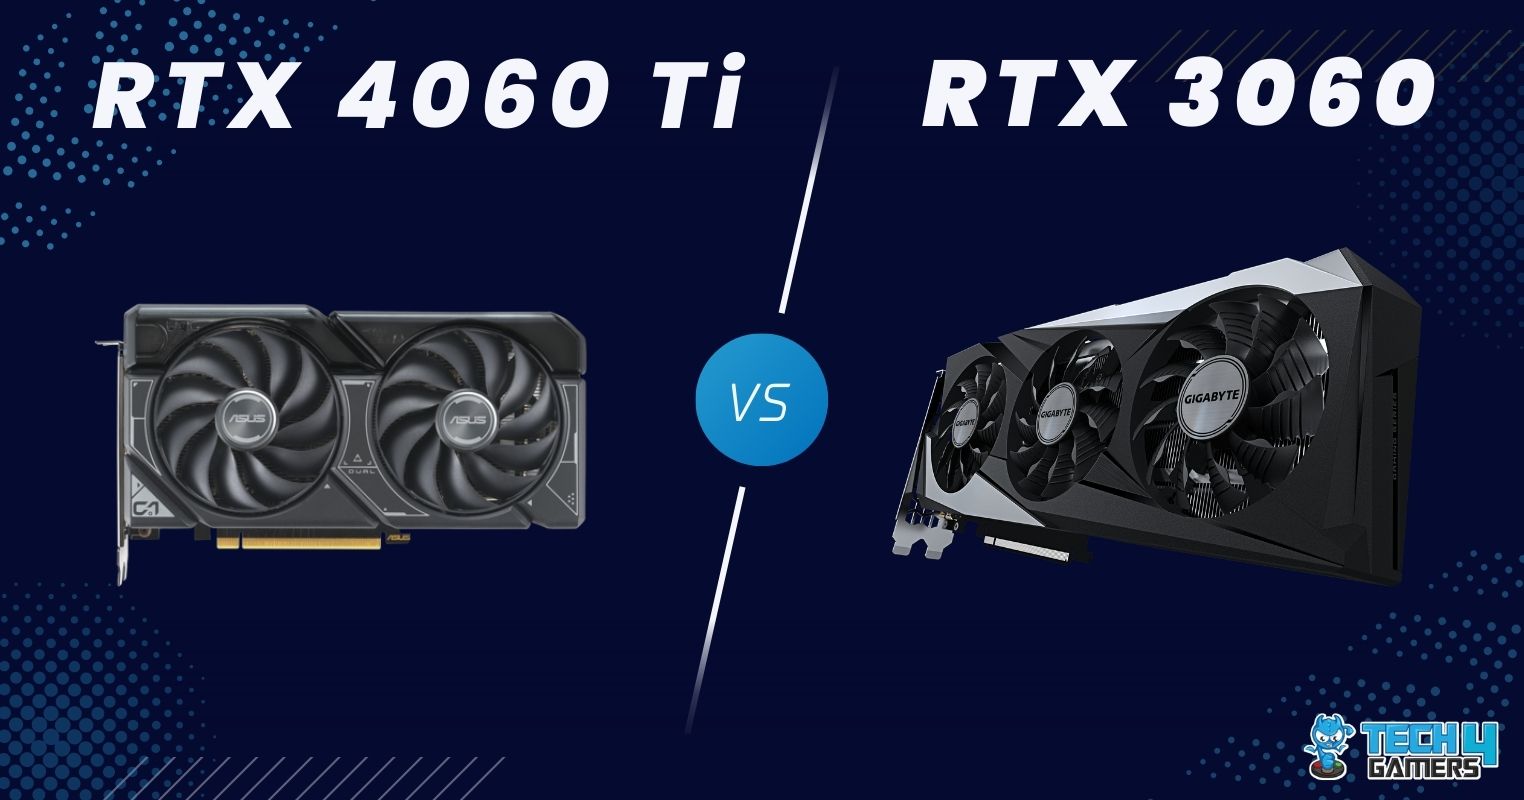 RTX 4060 Ti Vs RTX 3060: Which Is Better? - Tech4Gamers